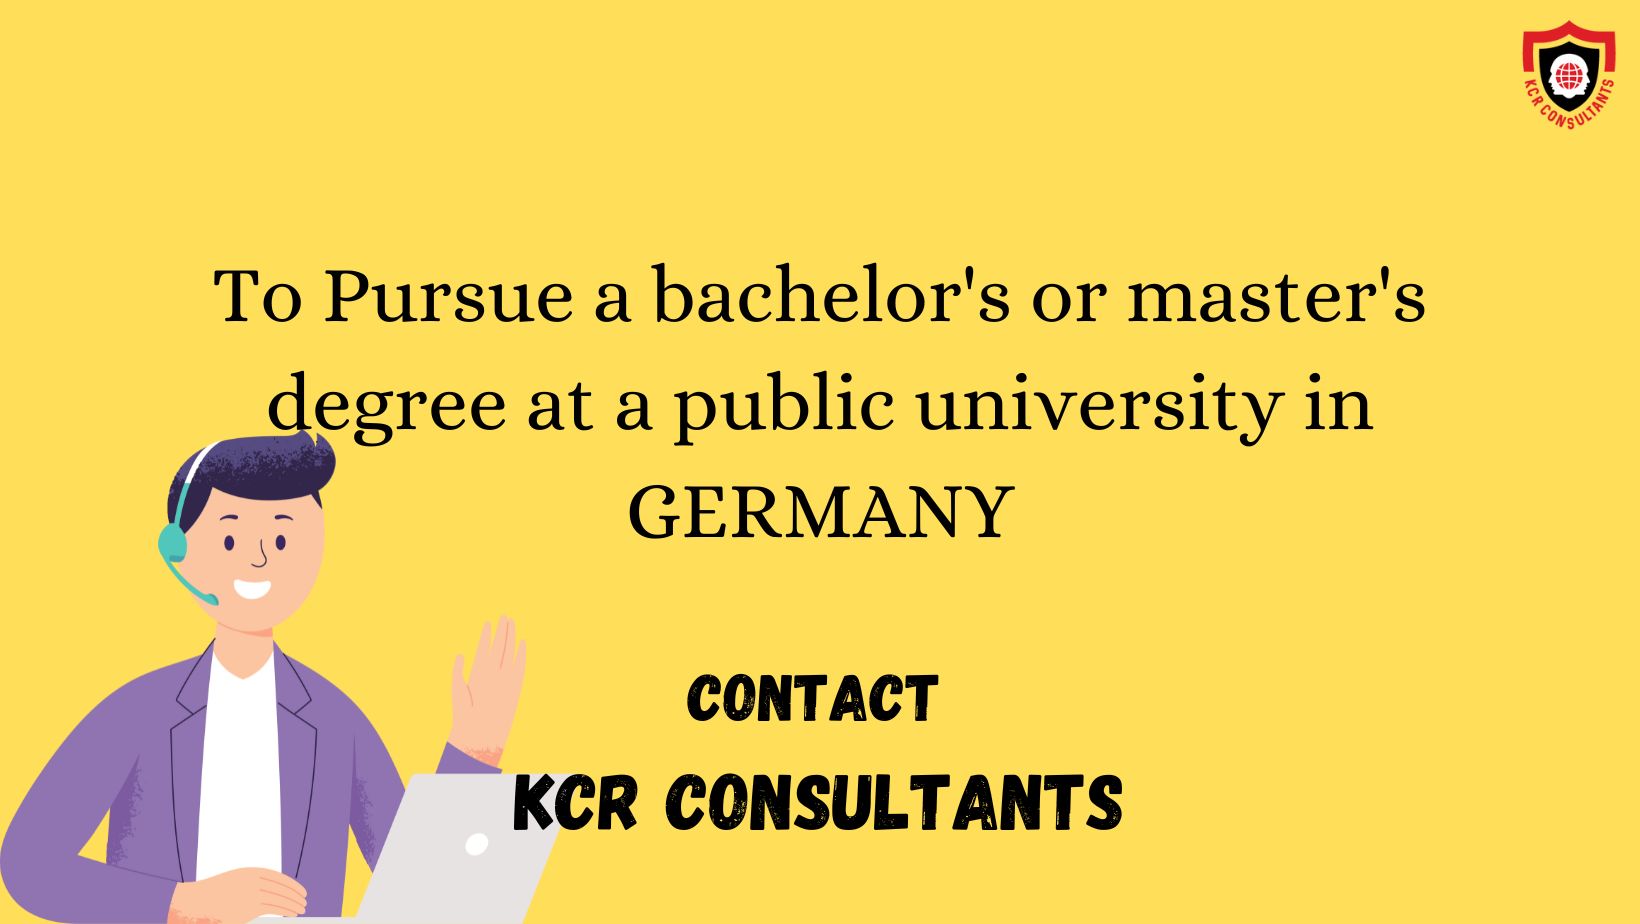 GERMANY - KCR CONSULTANTS - Contact us